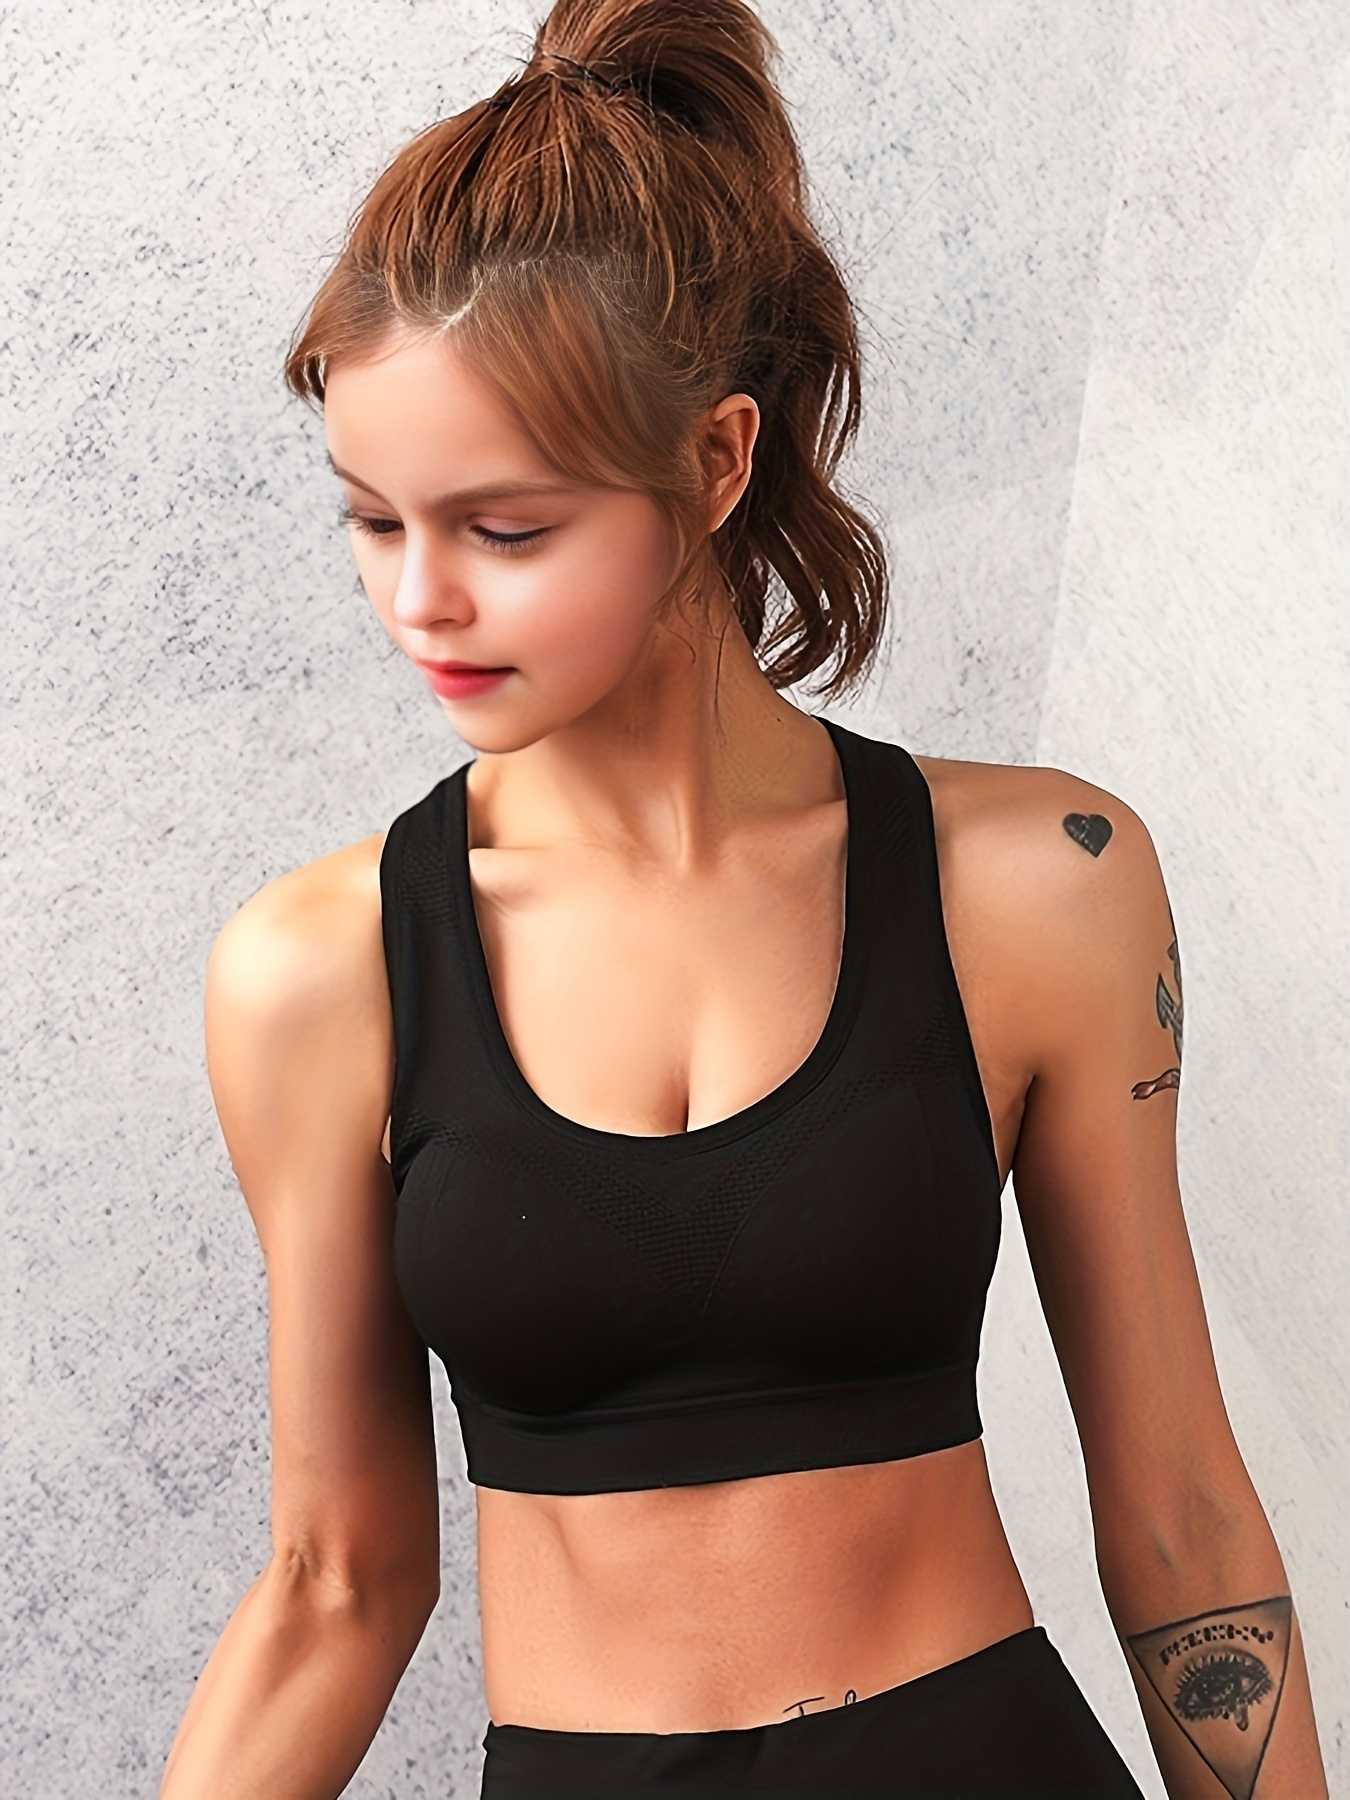 1pc Fashionable Sports Bra For Women, Breathable Moisture Wicking